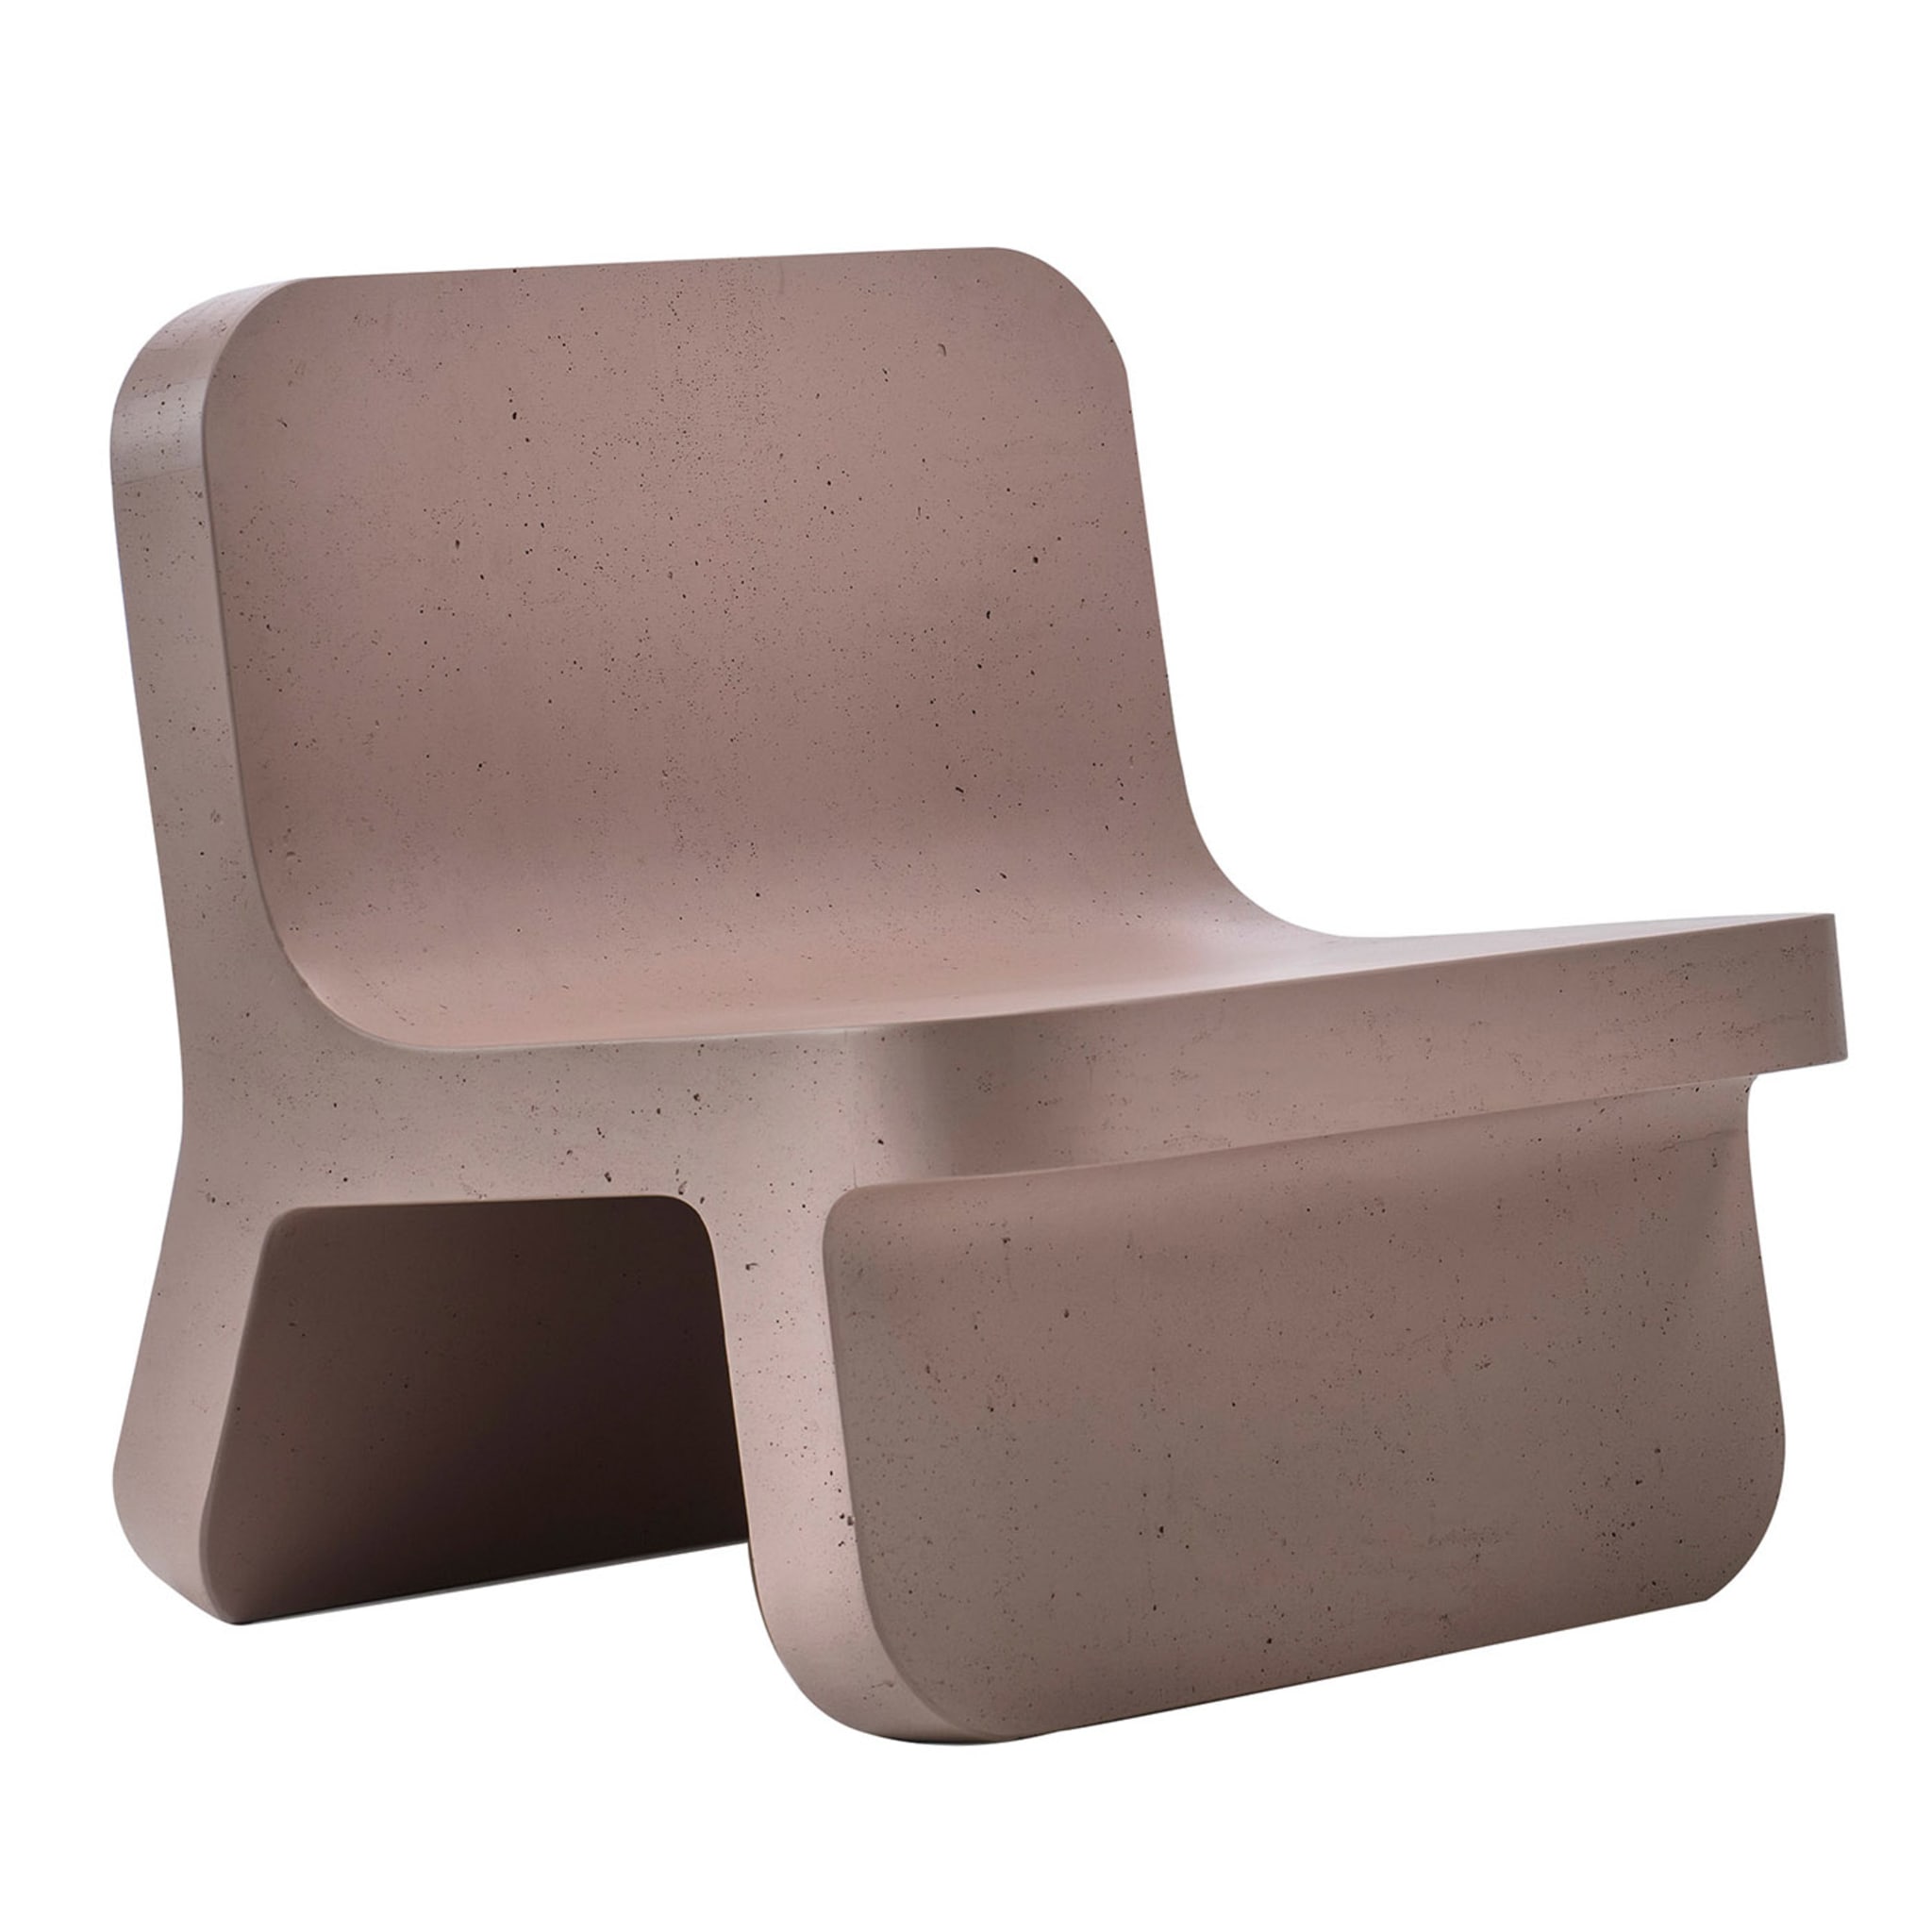 Torcello Lounge Chair by Defne Koz and Marco Susani - Main view